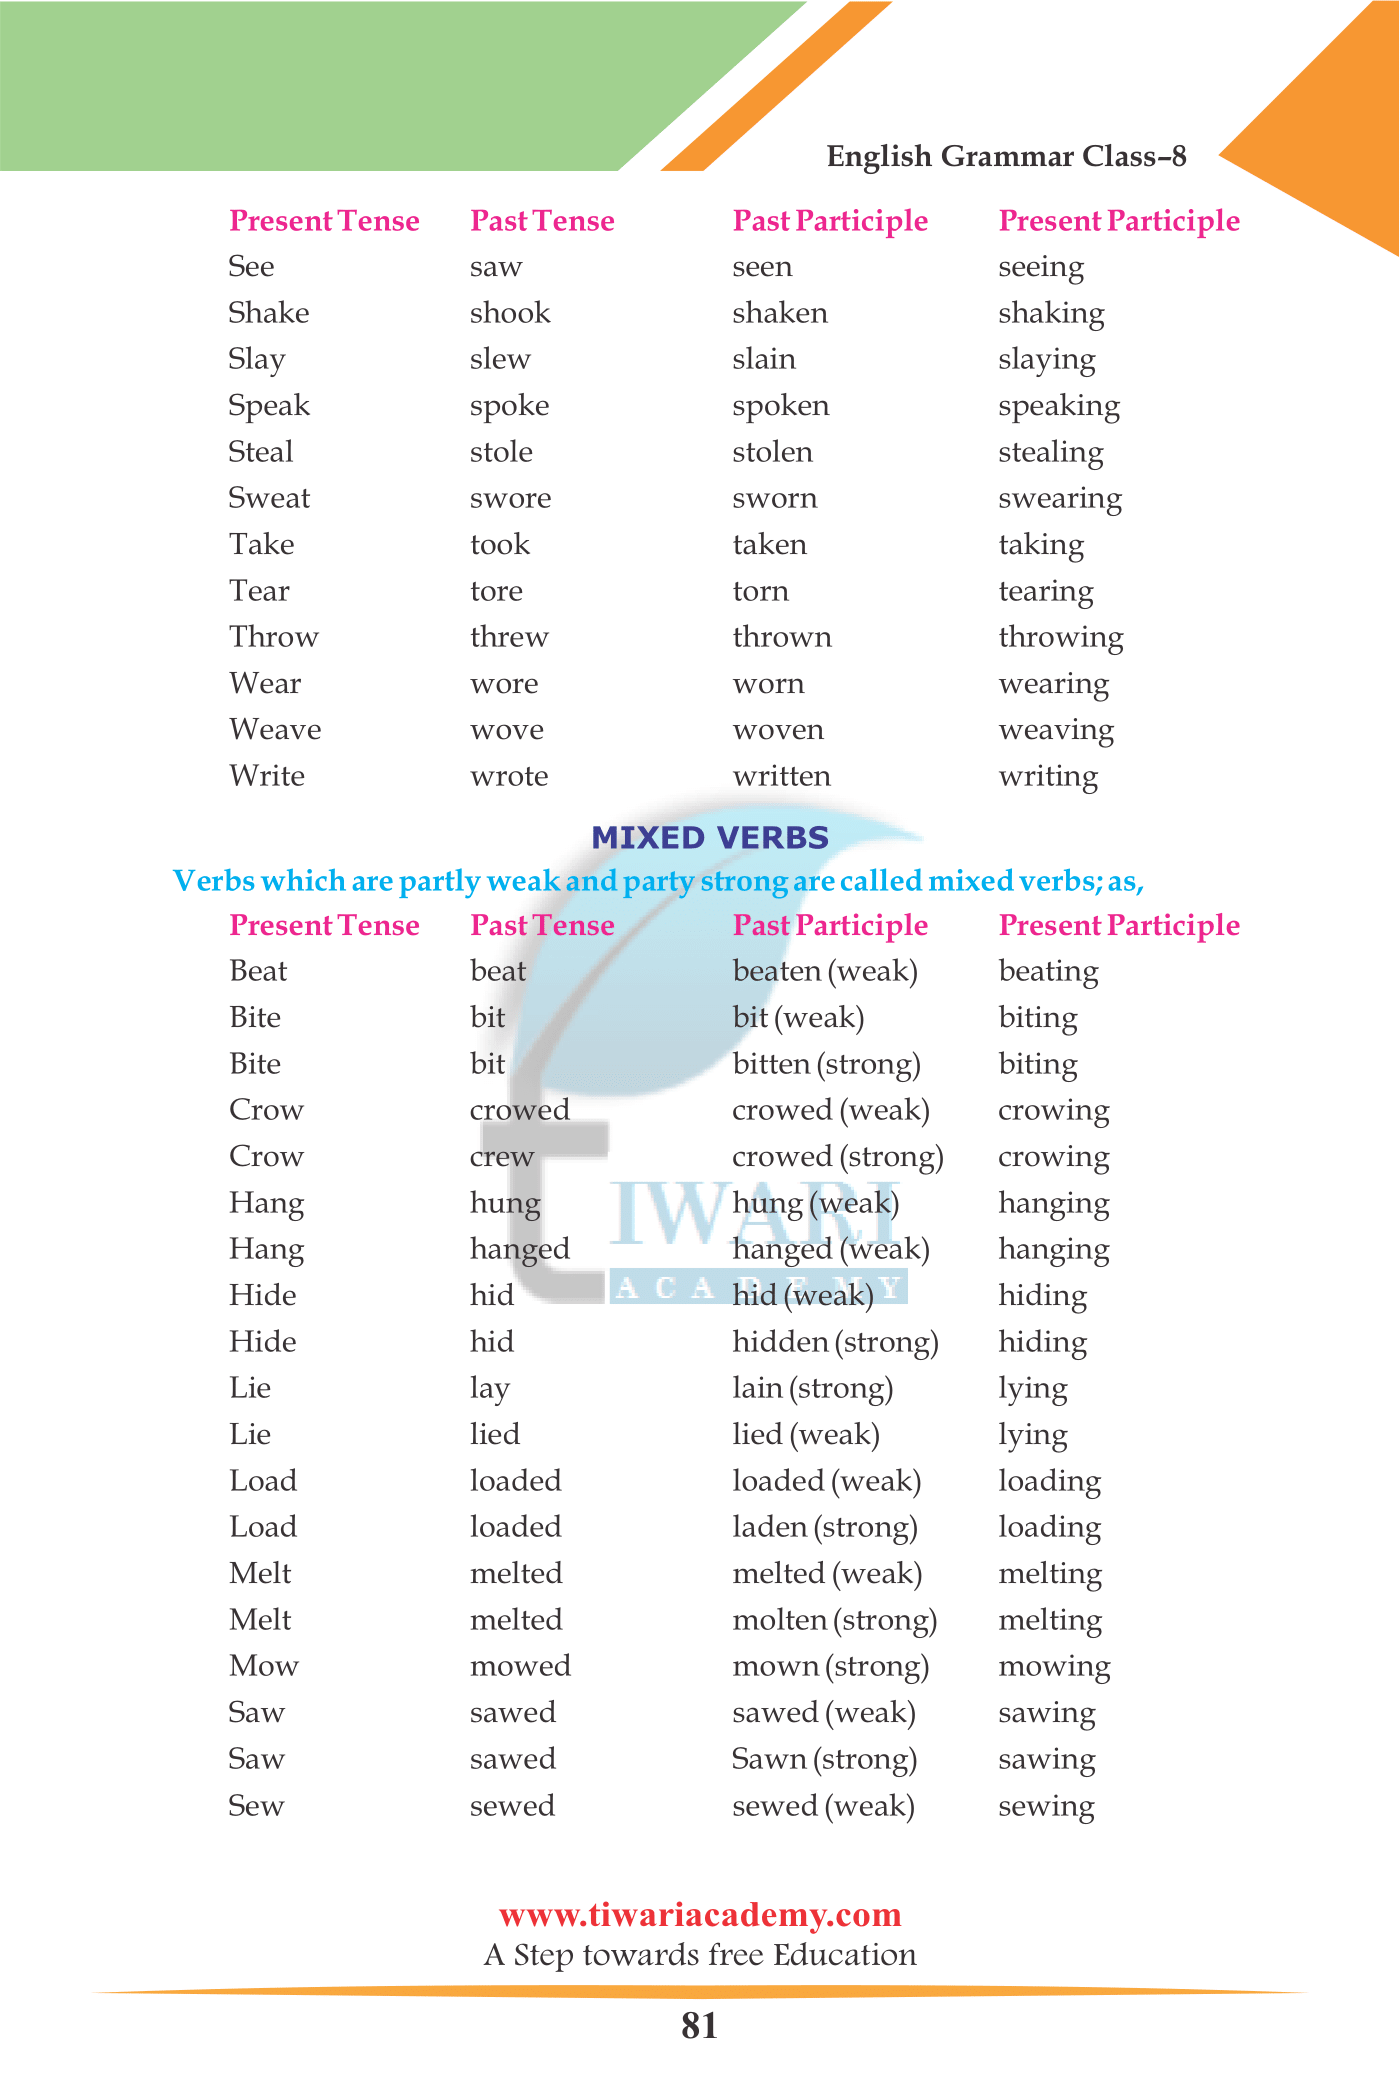 Class 8 English Grammar Chapter 6 The Verb for Session 2023-2024.